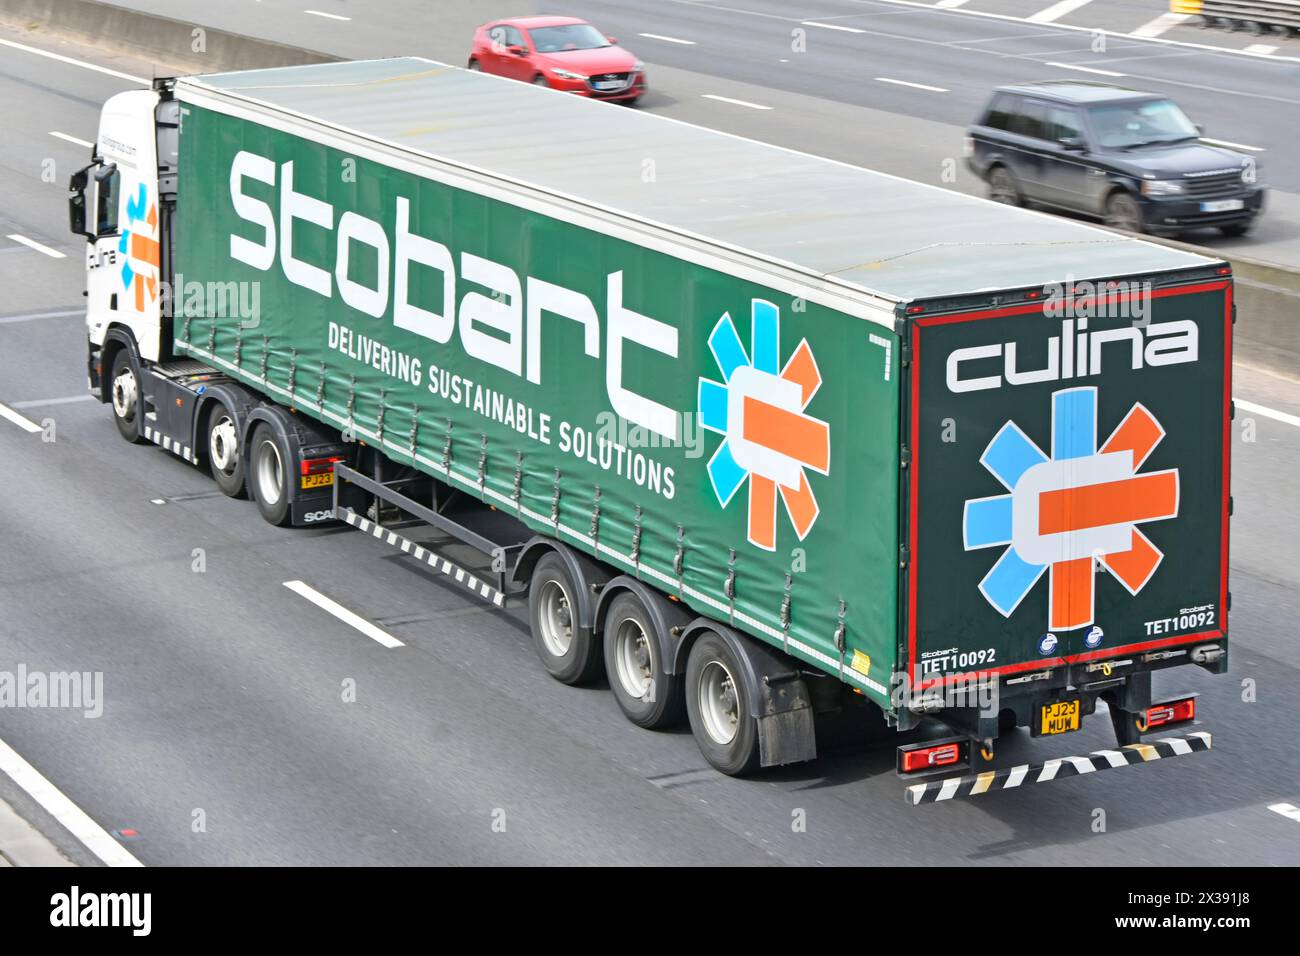 Culina Group hgv lorry truck & logo on curtain trailer acquisition of Eddie Stobart business now under Müller Group parent company on M25 motorway UK Stock Photo